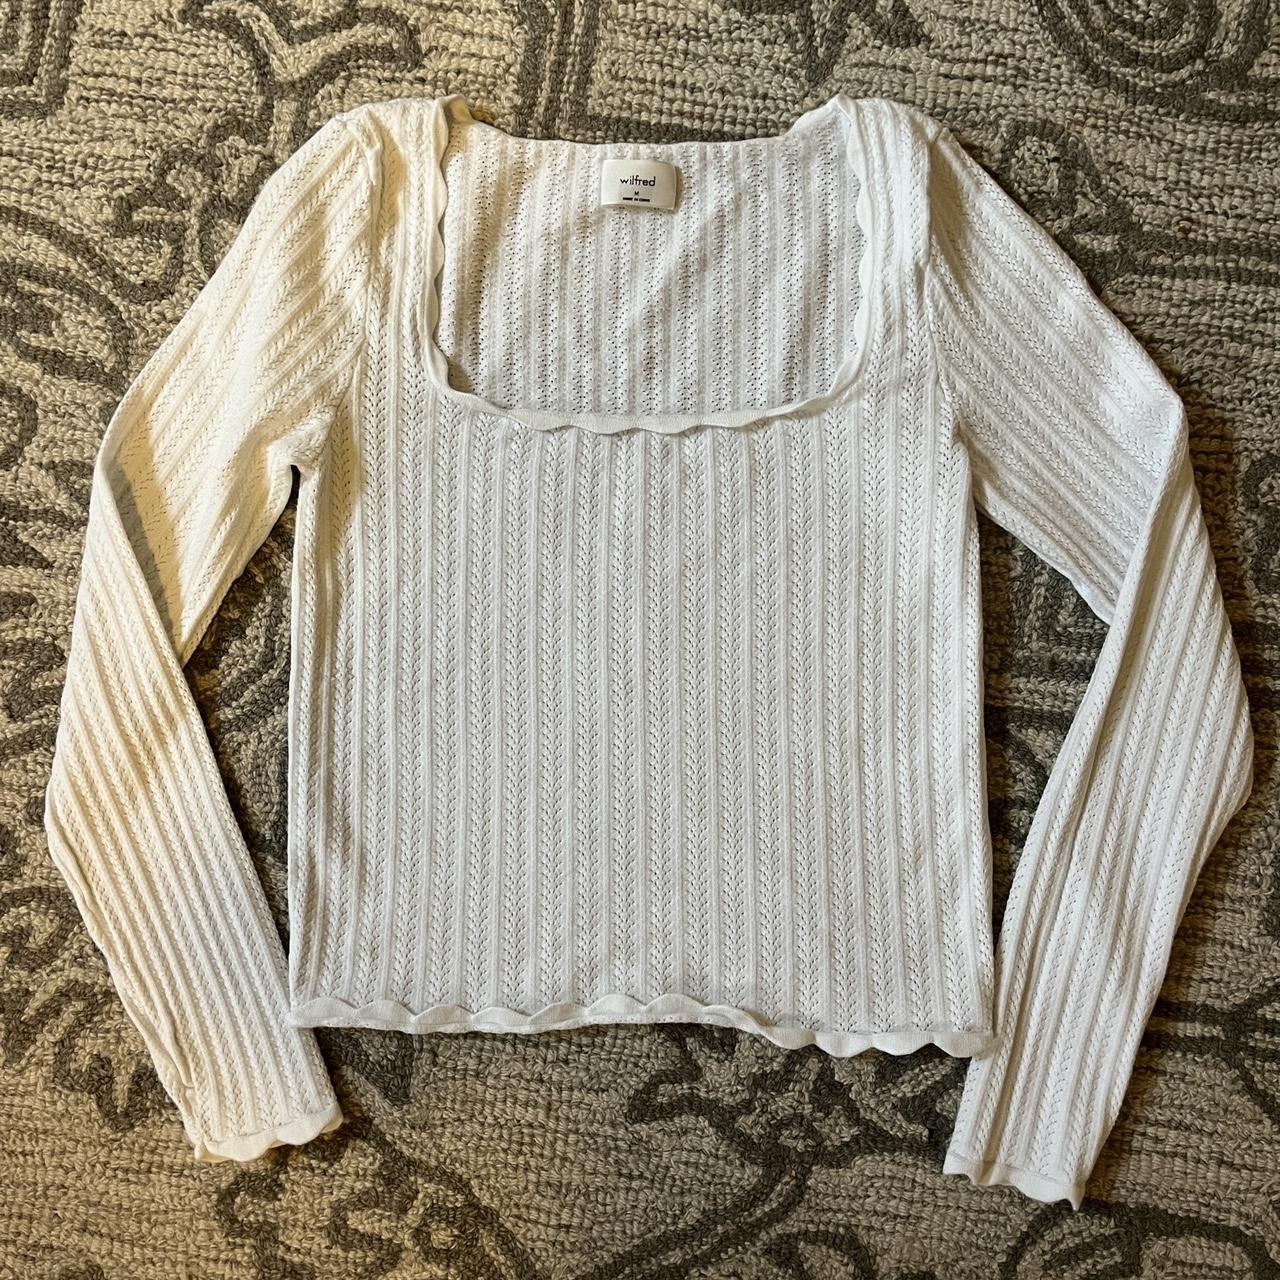 ARITZIA - Wilfred white square-neck knit long-sleeve... - Depop